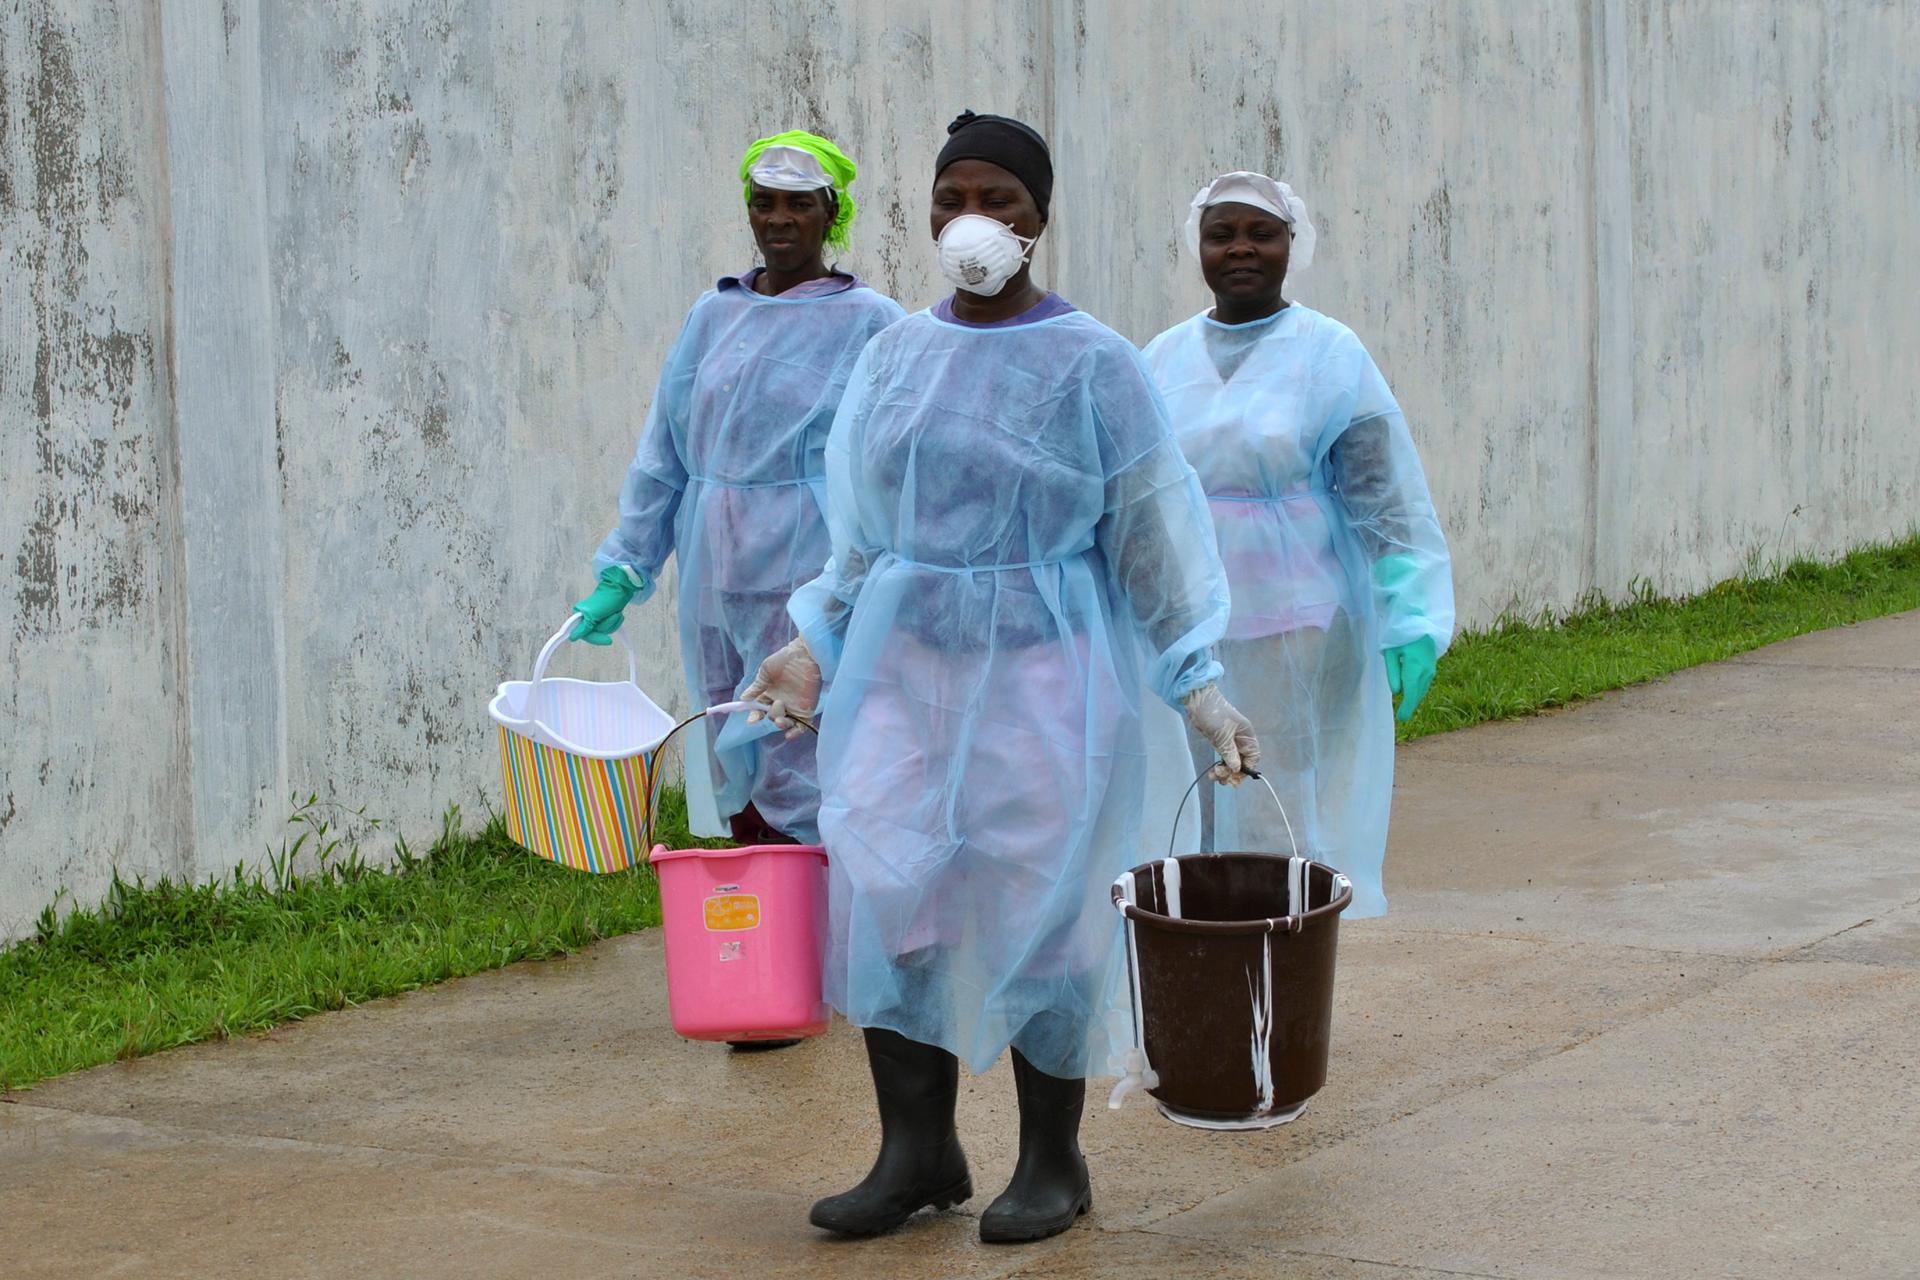 Health workers carry buckets of disinfectant at the newly-constructed Island Clinic and Ebola treatment center in Monrovia, Liberia, September 25, 2014.